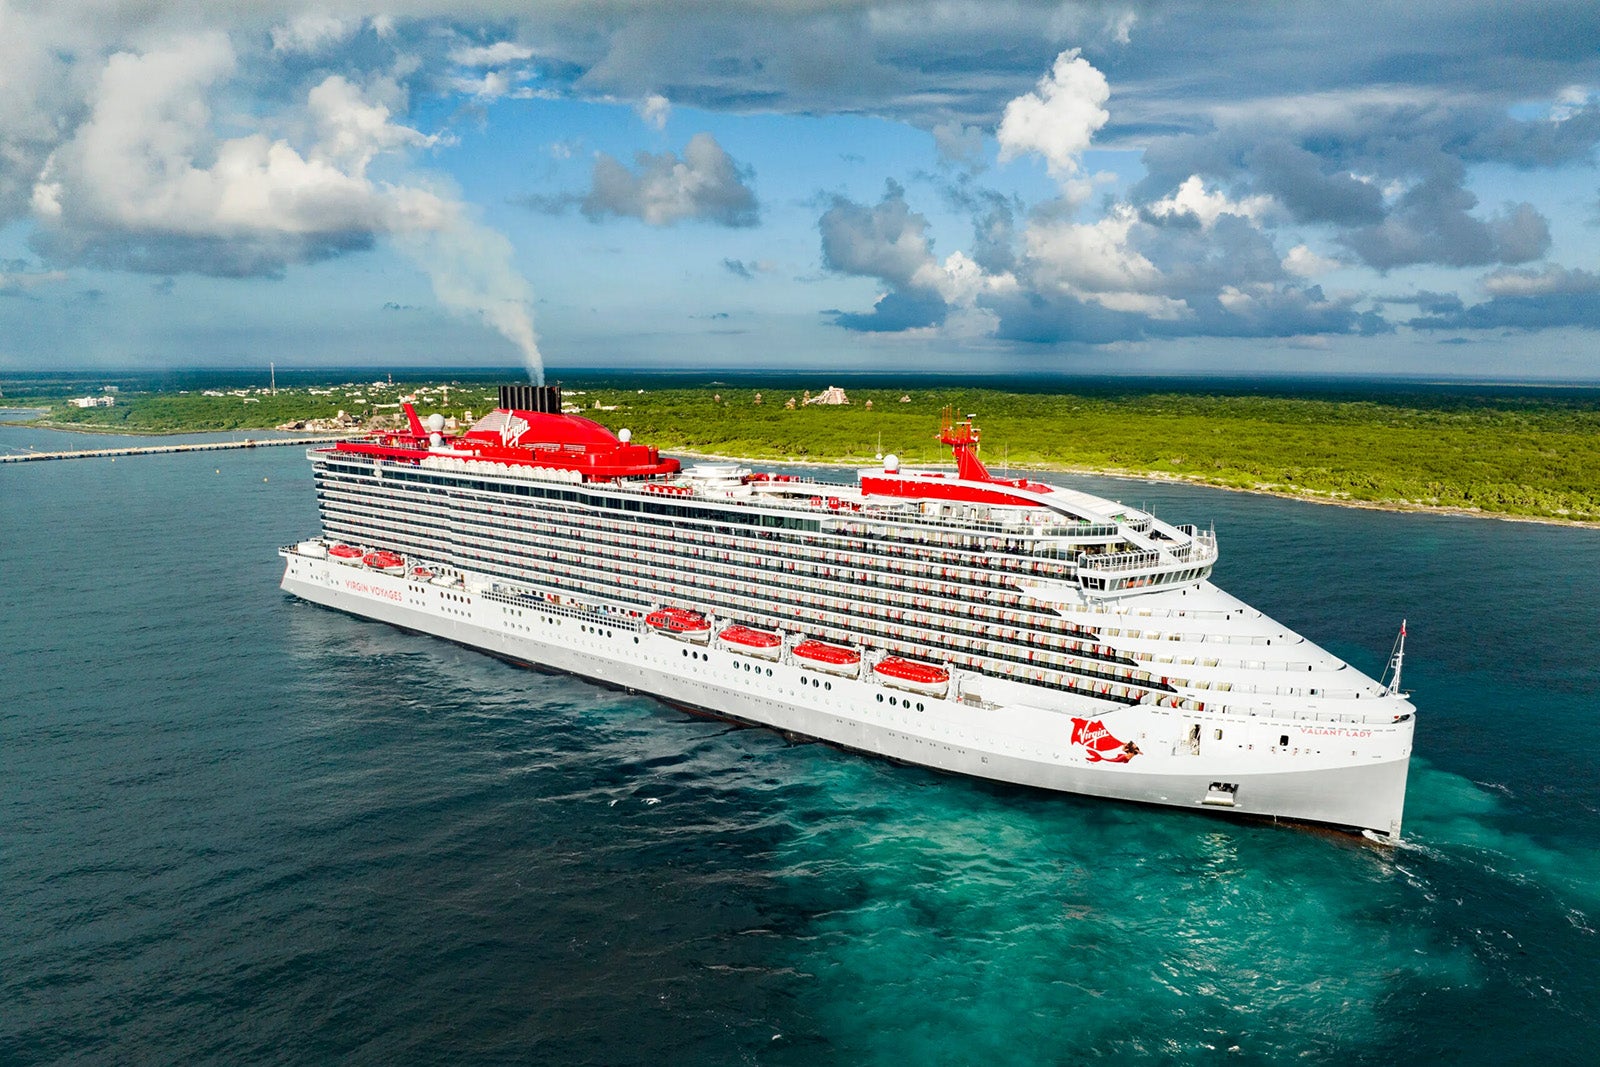 You are currently viewing Great points deals on Virgin Voyages cruises for as little as 115,000 points